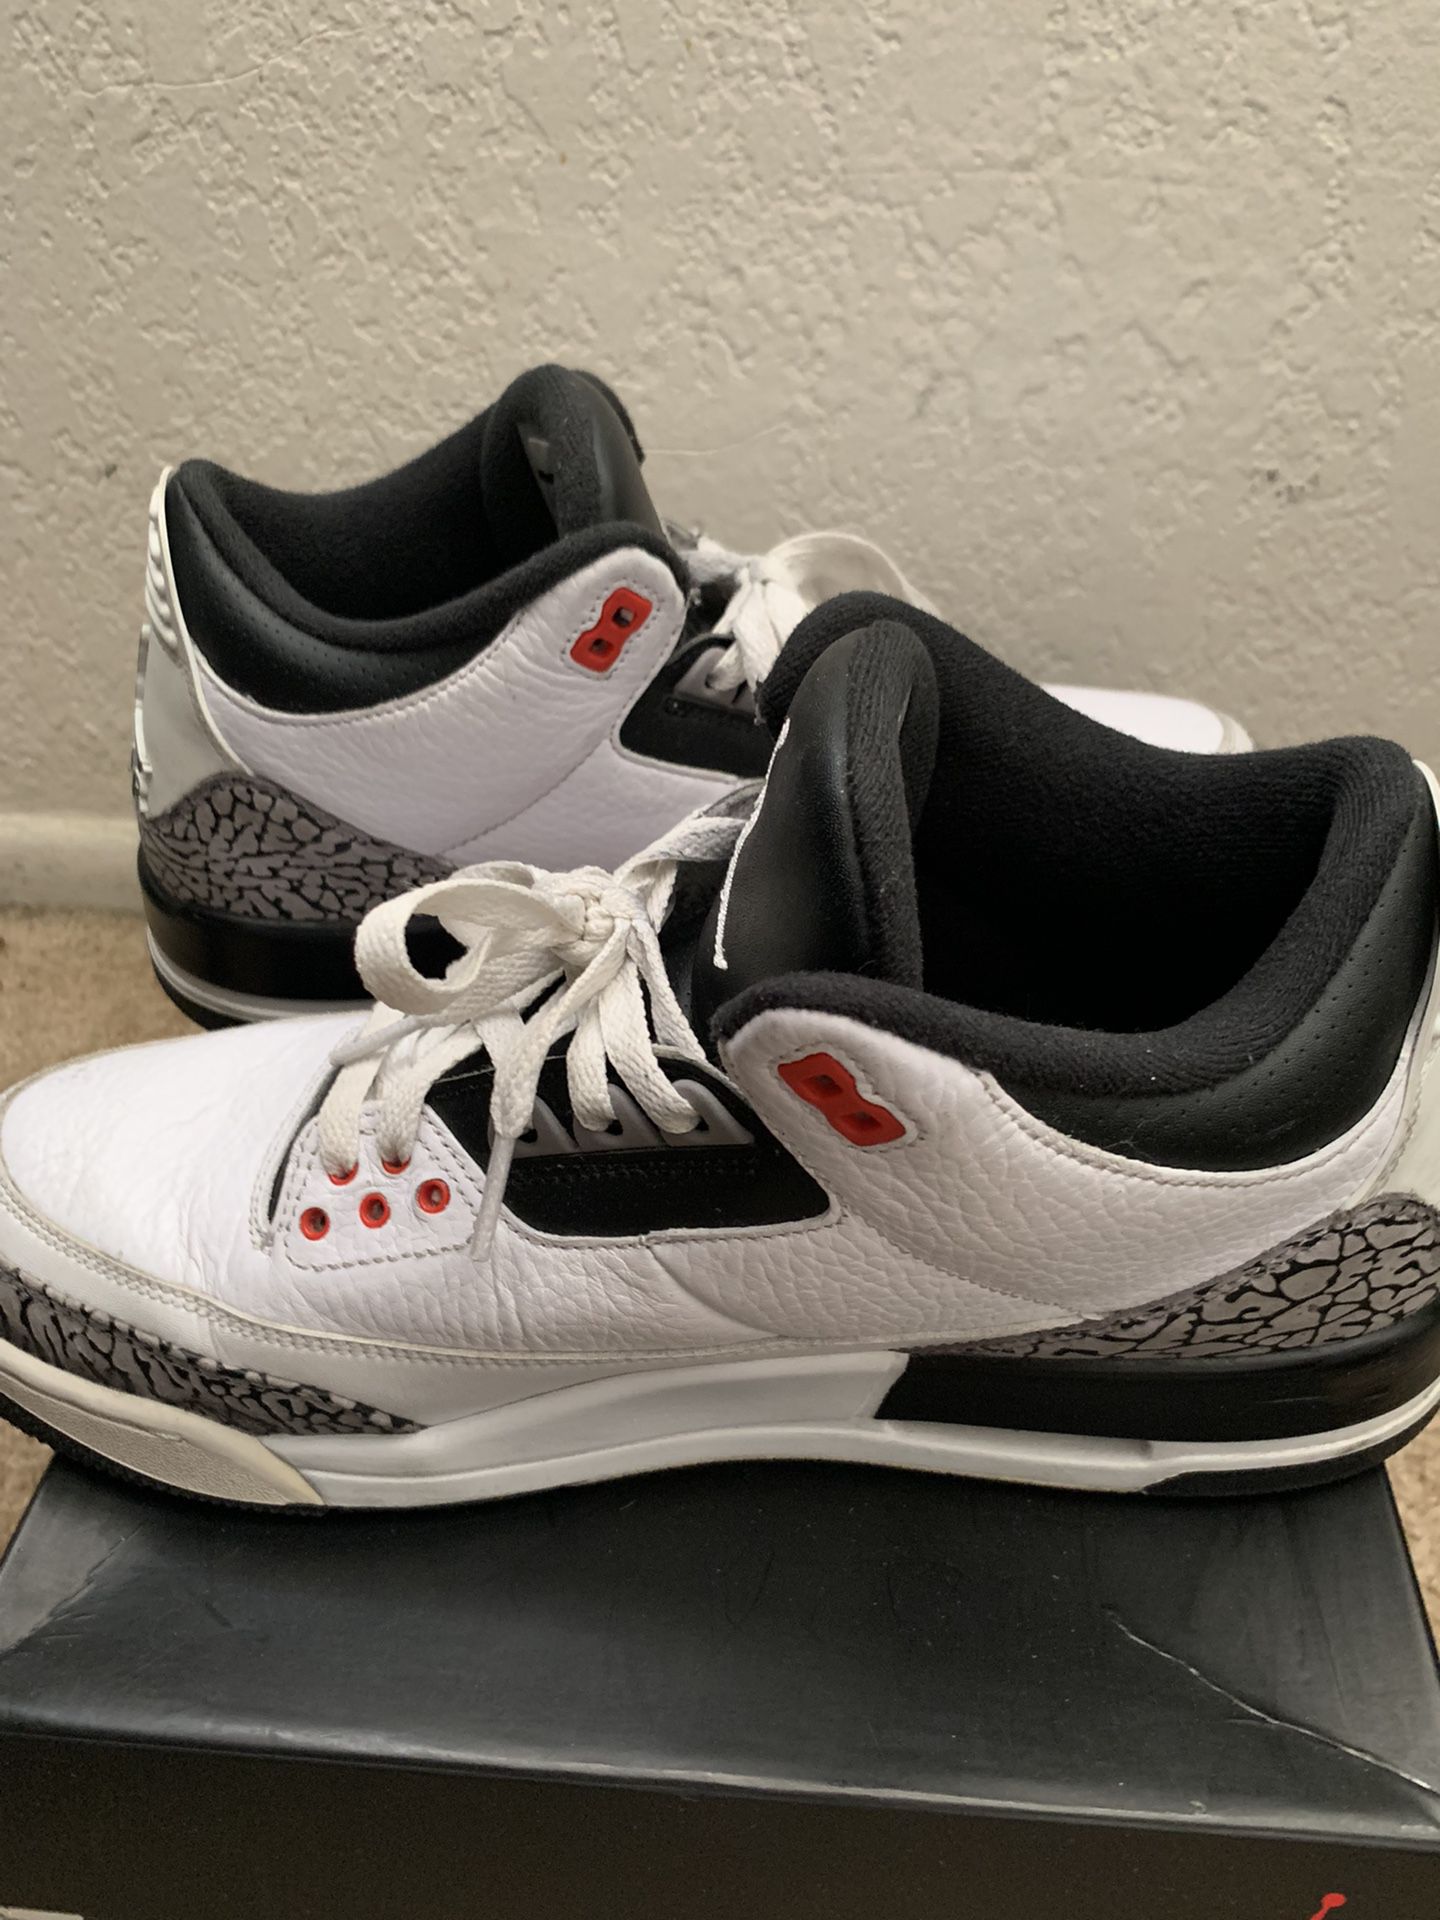 Air Jordan 3 Size 10.5 Wizards for Sale in Irwindale, CA - OfferUp